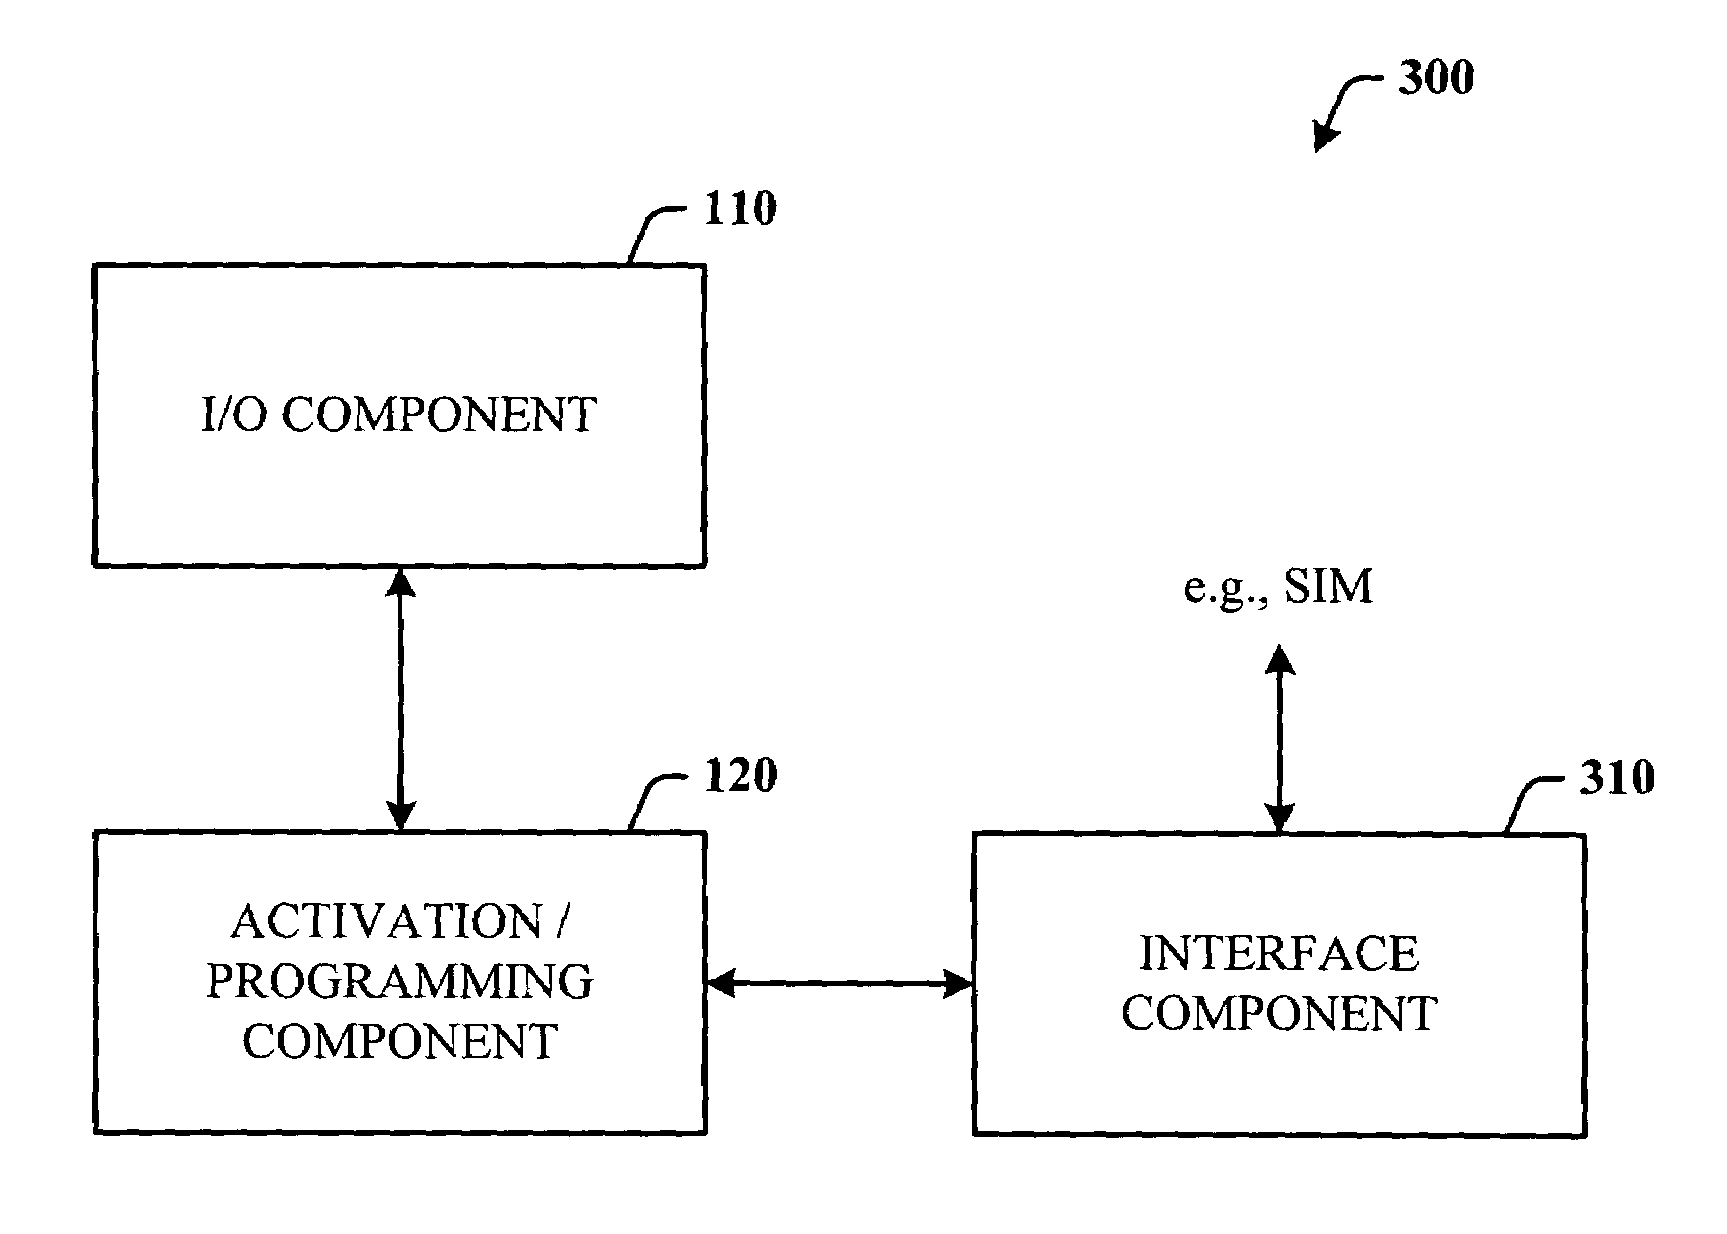 Remote programming/activation of SIM enabled ATA device